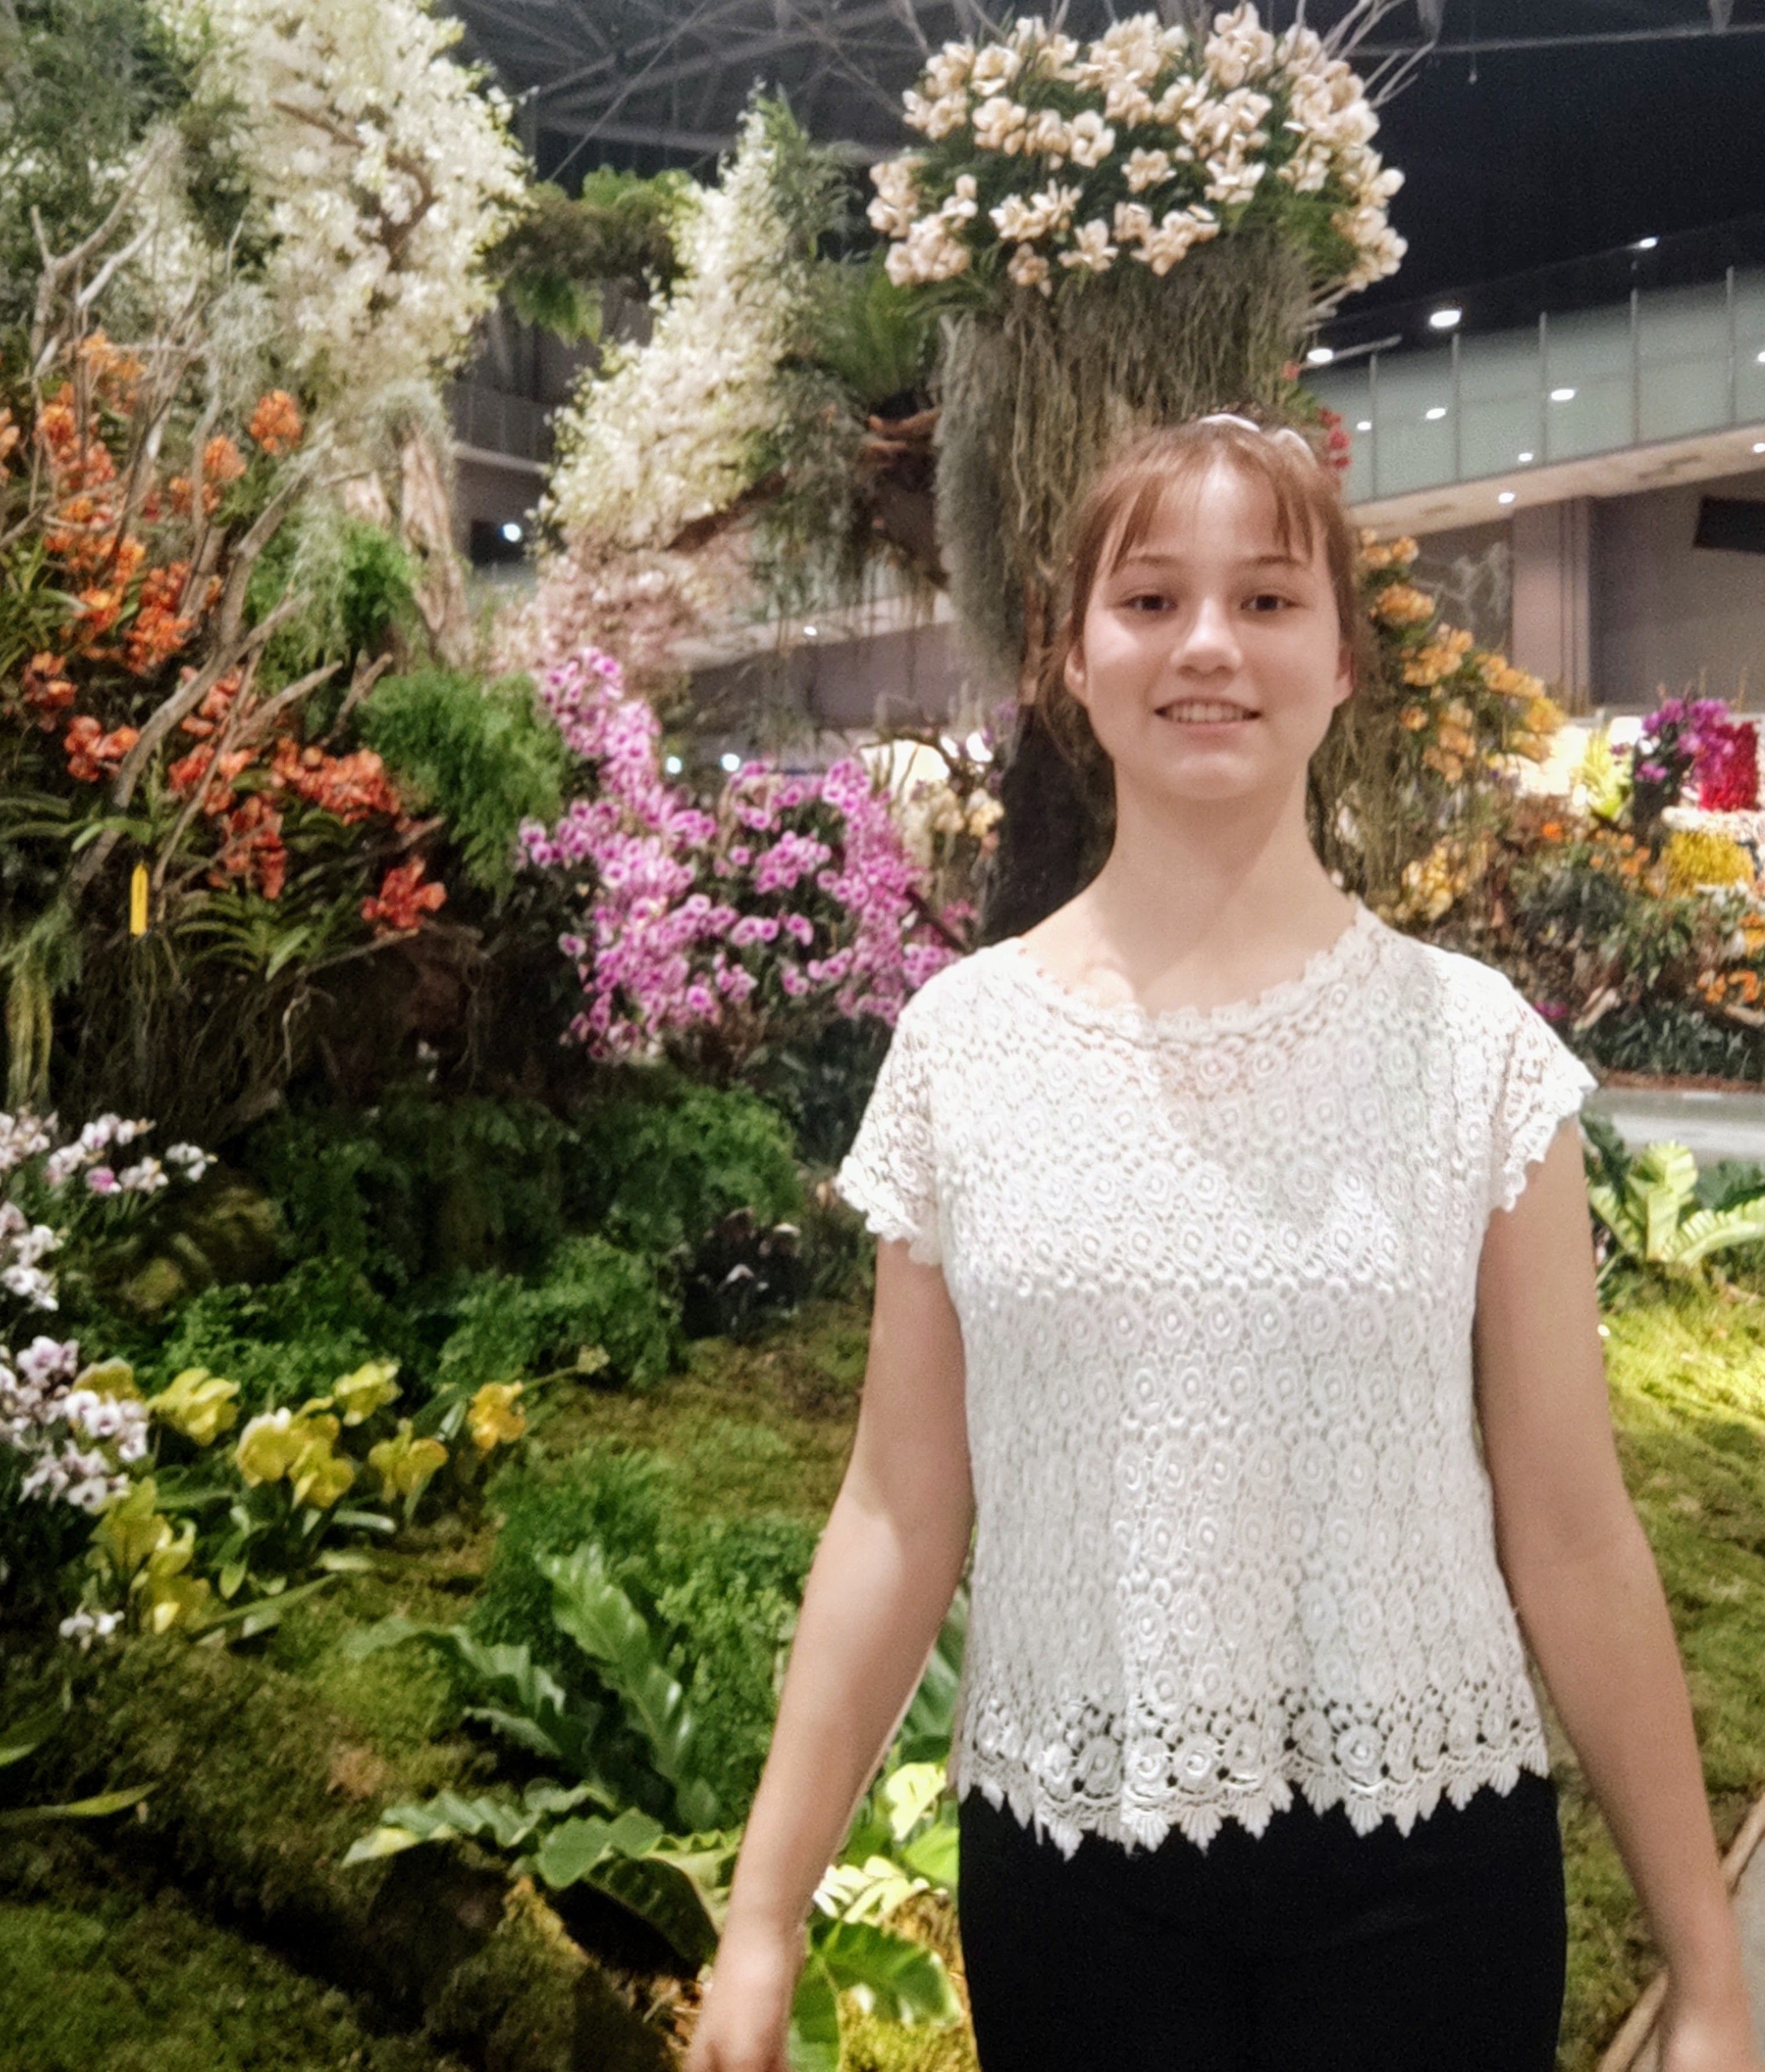 Ruth White at the International Orchid Show in Tainan